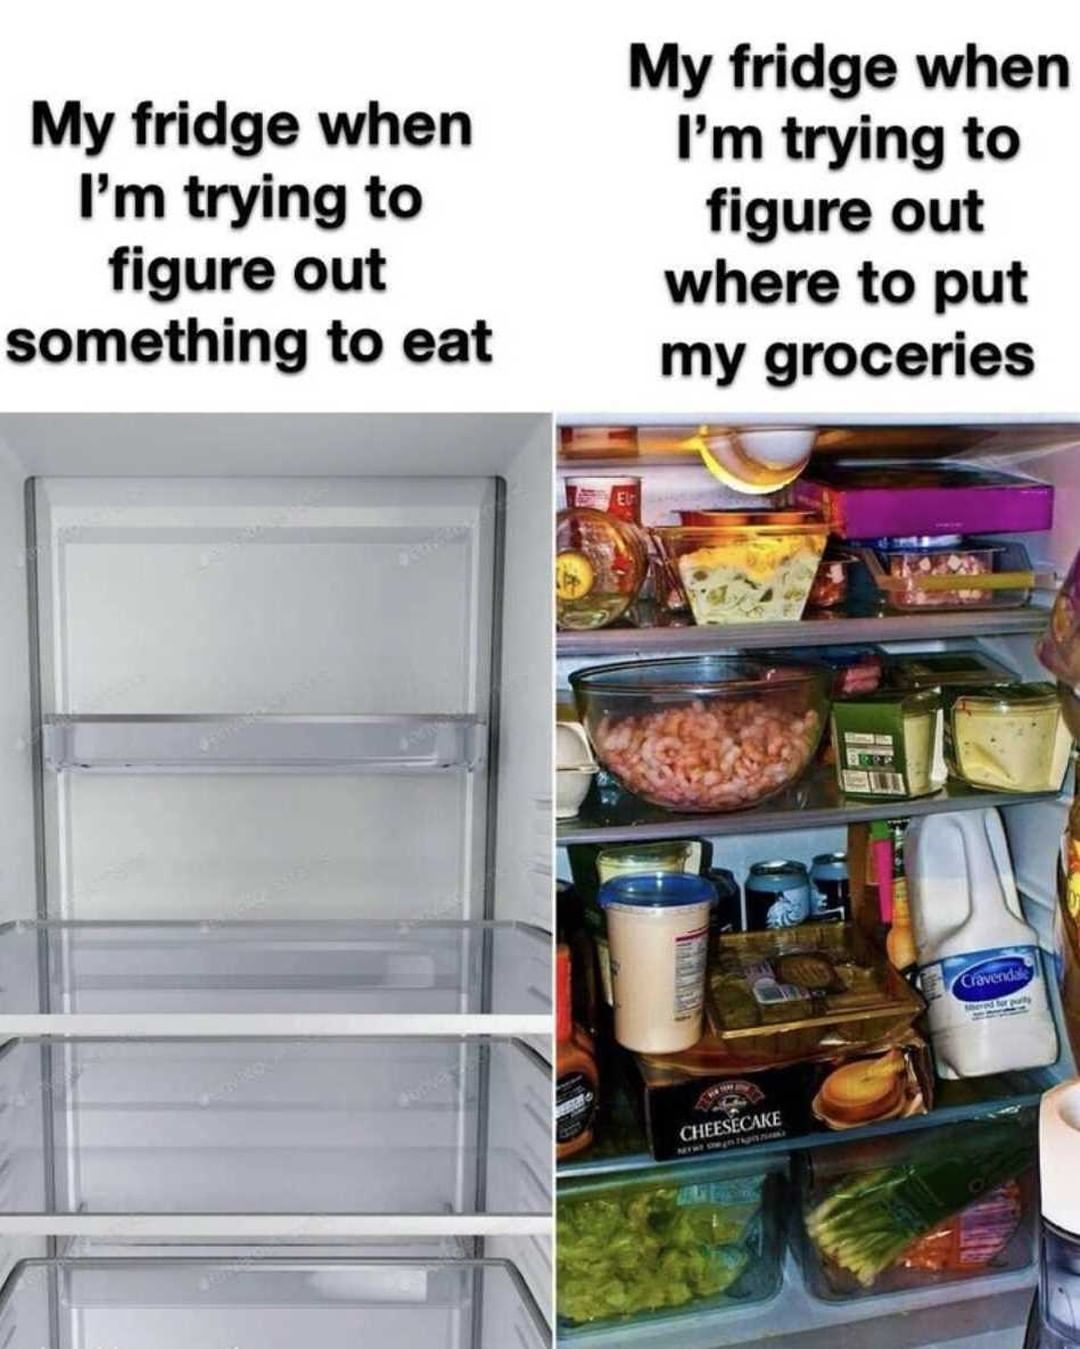 My fridge when I'm trying to figure out something to eat. My fridge when I'm trying to figure out where to put my groceries.